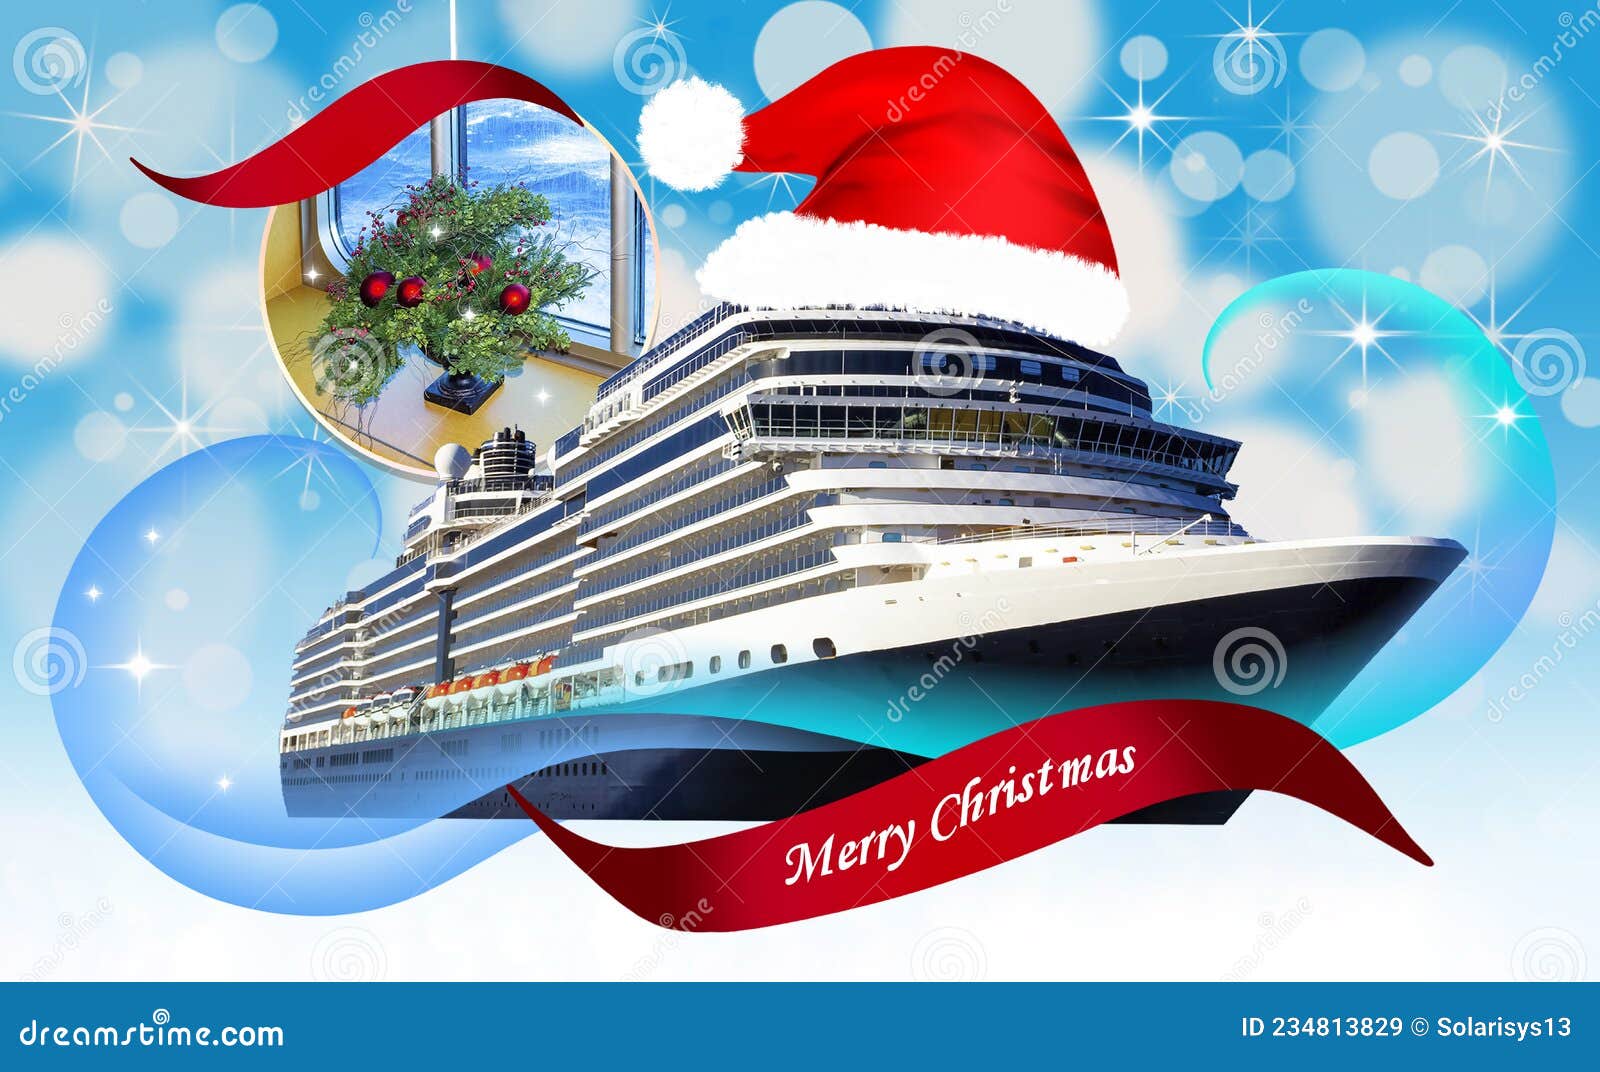 Christmas Cruise and Travel Vacation Concept Stock Image Image of